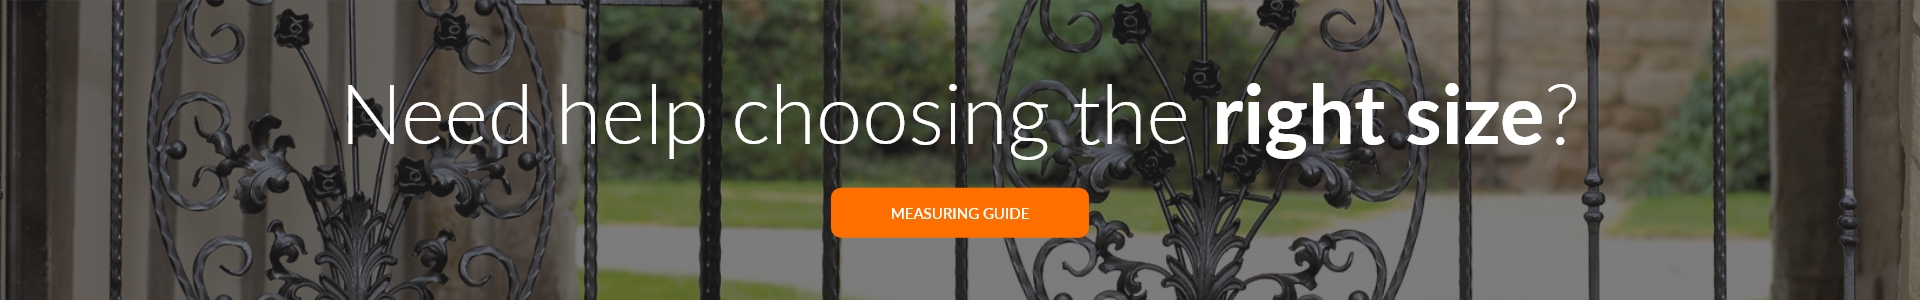 Review the measuring guide for help with oredering sizes